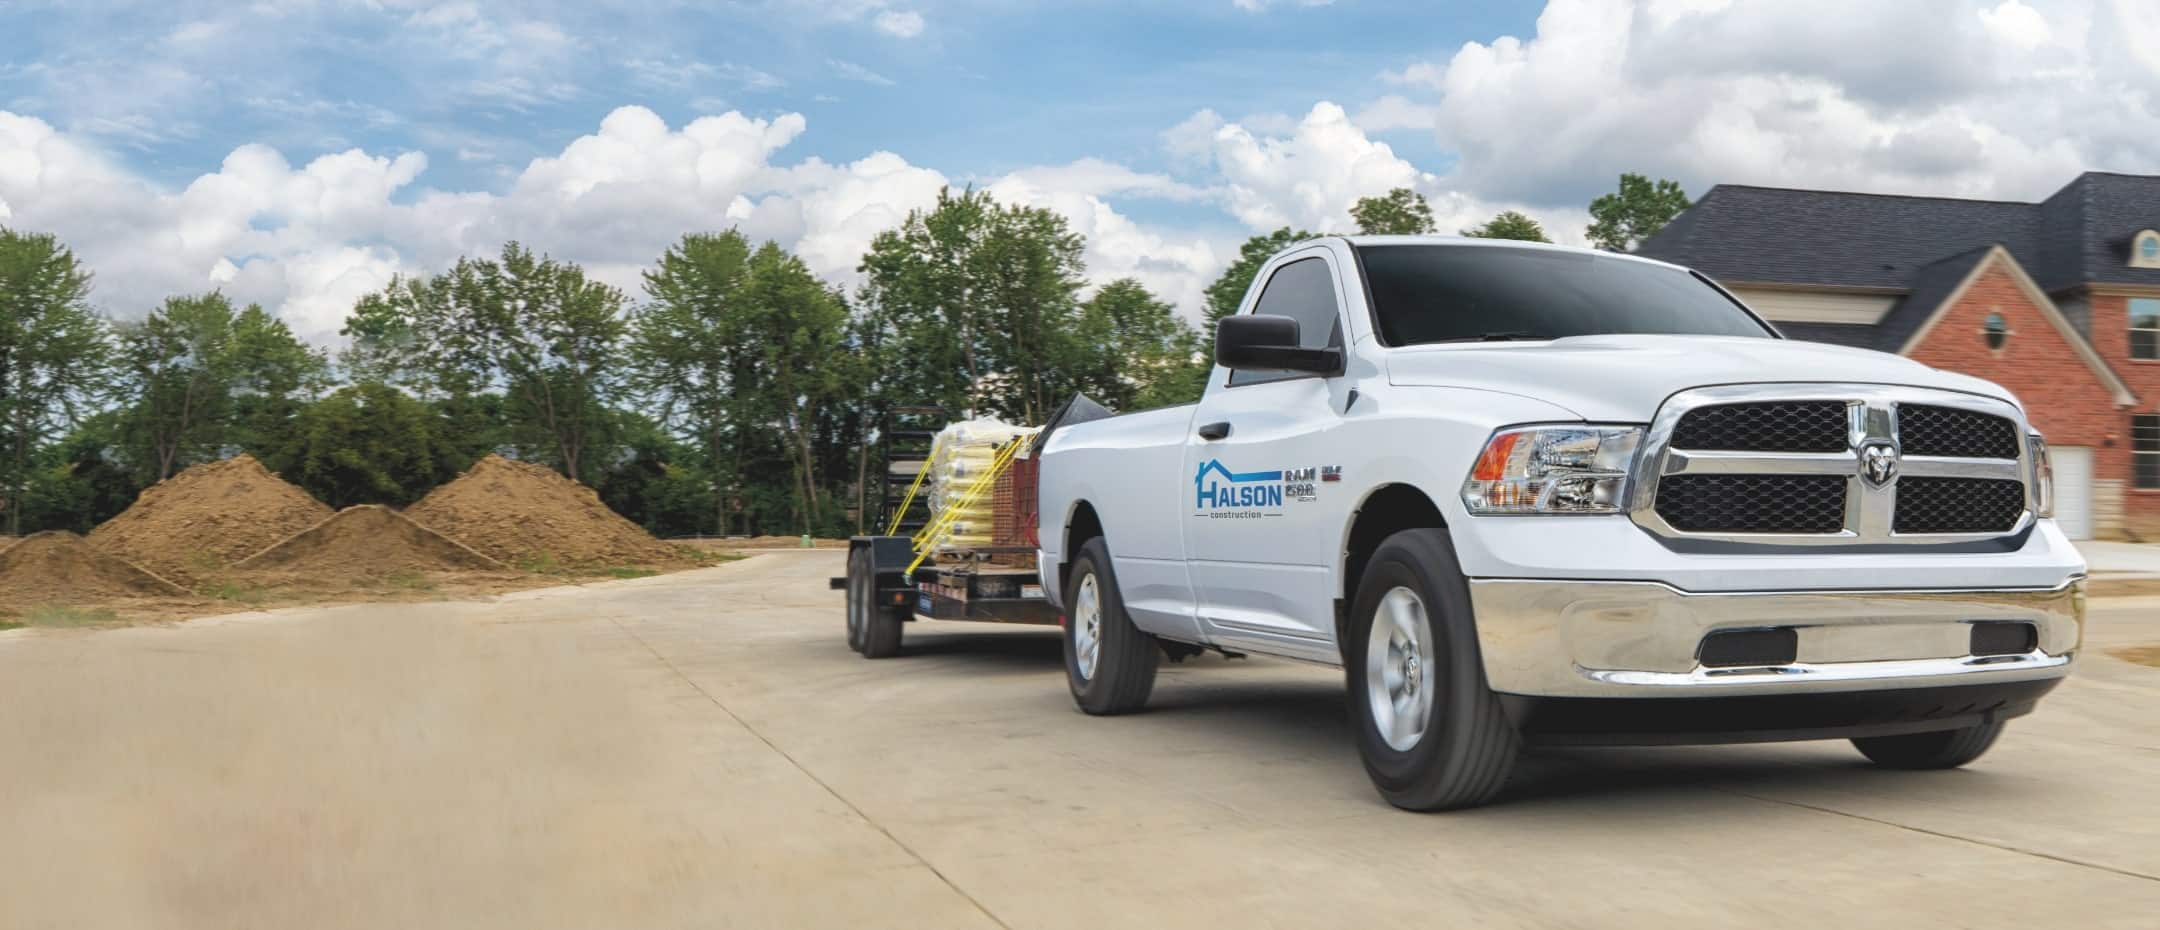 The 2022 Ram 1500 Classic towing a horse trailer.